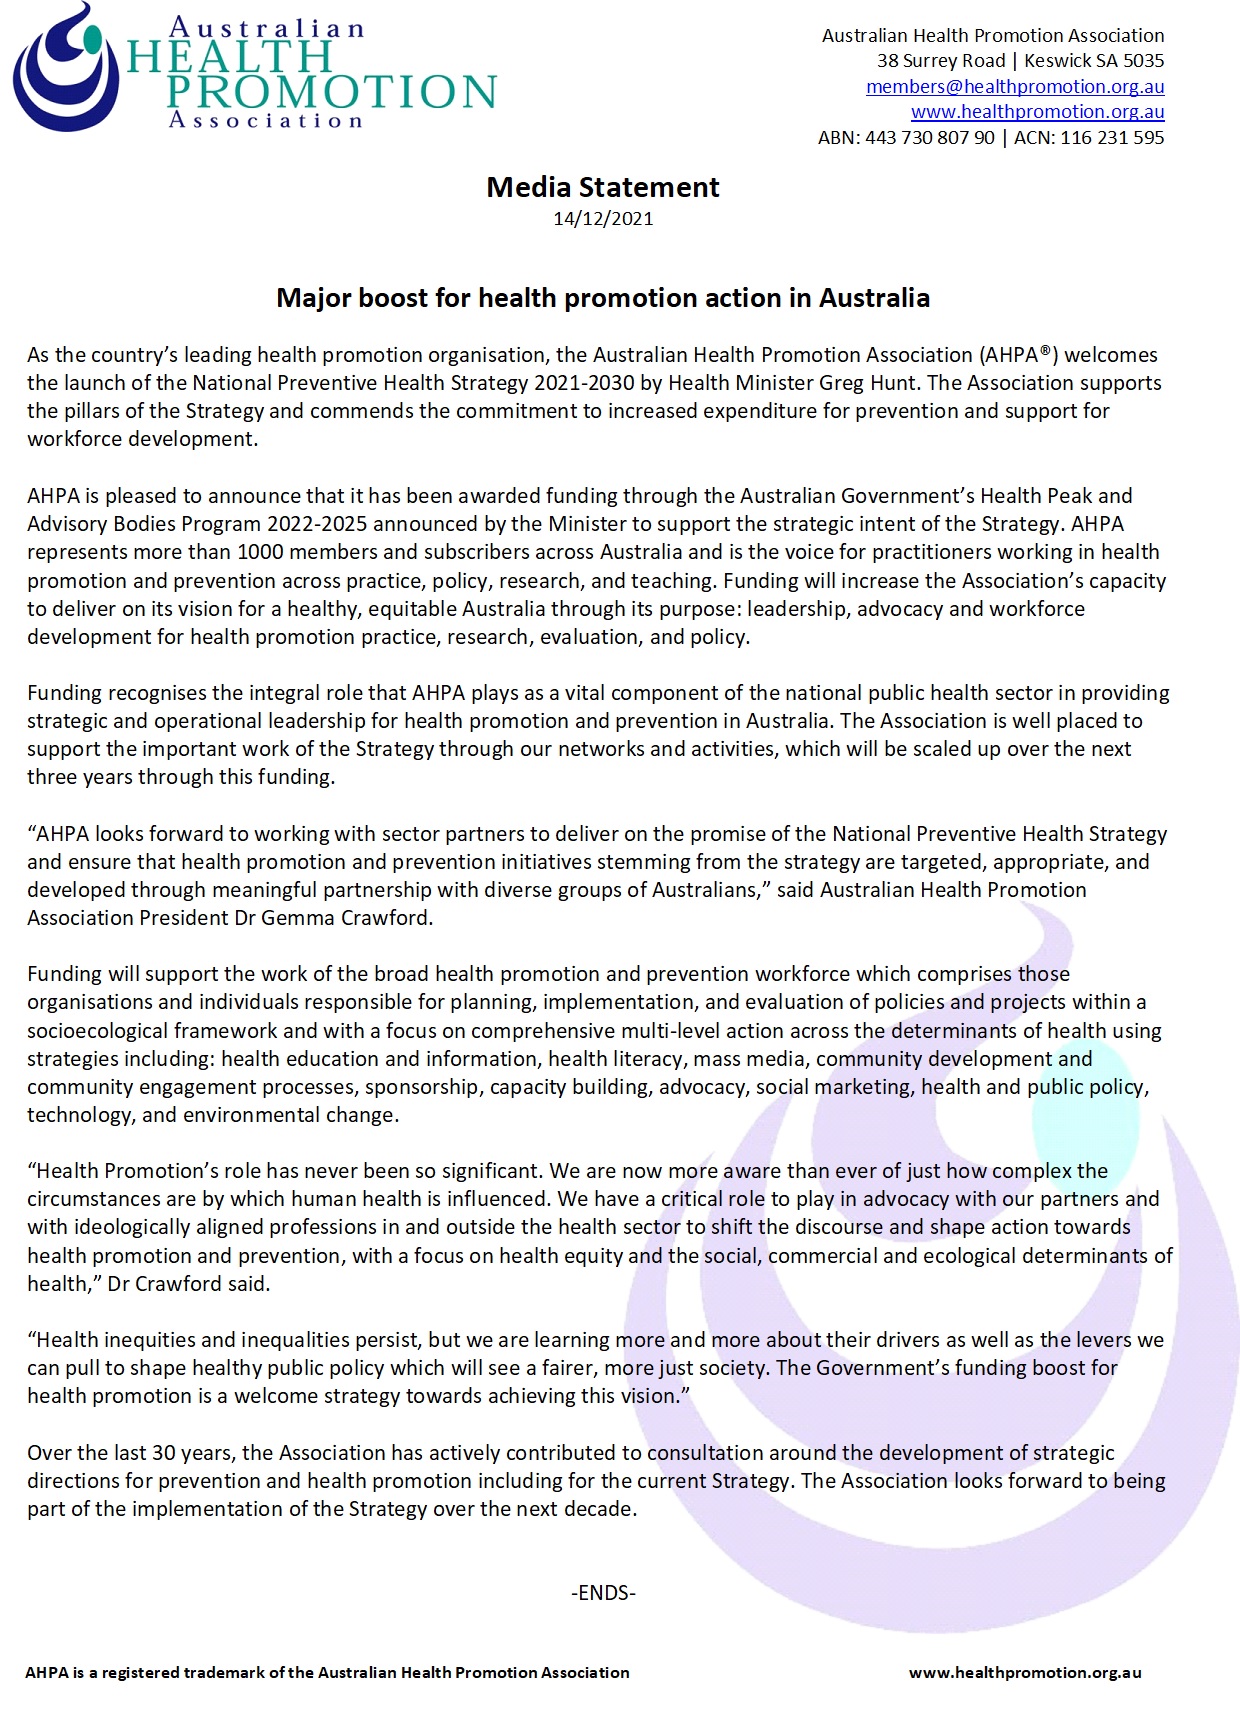 Media Statement Major funding boost for health promotion action in Aus